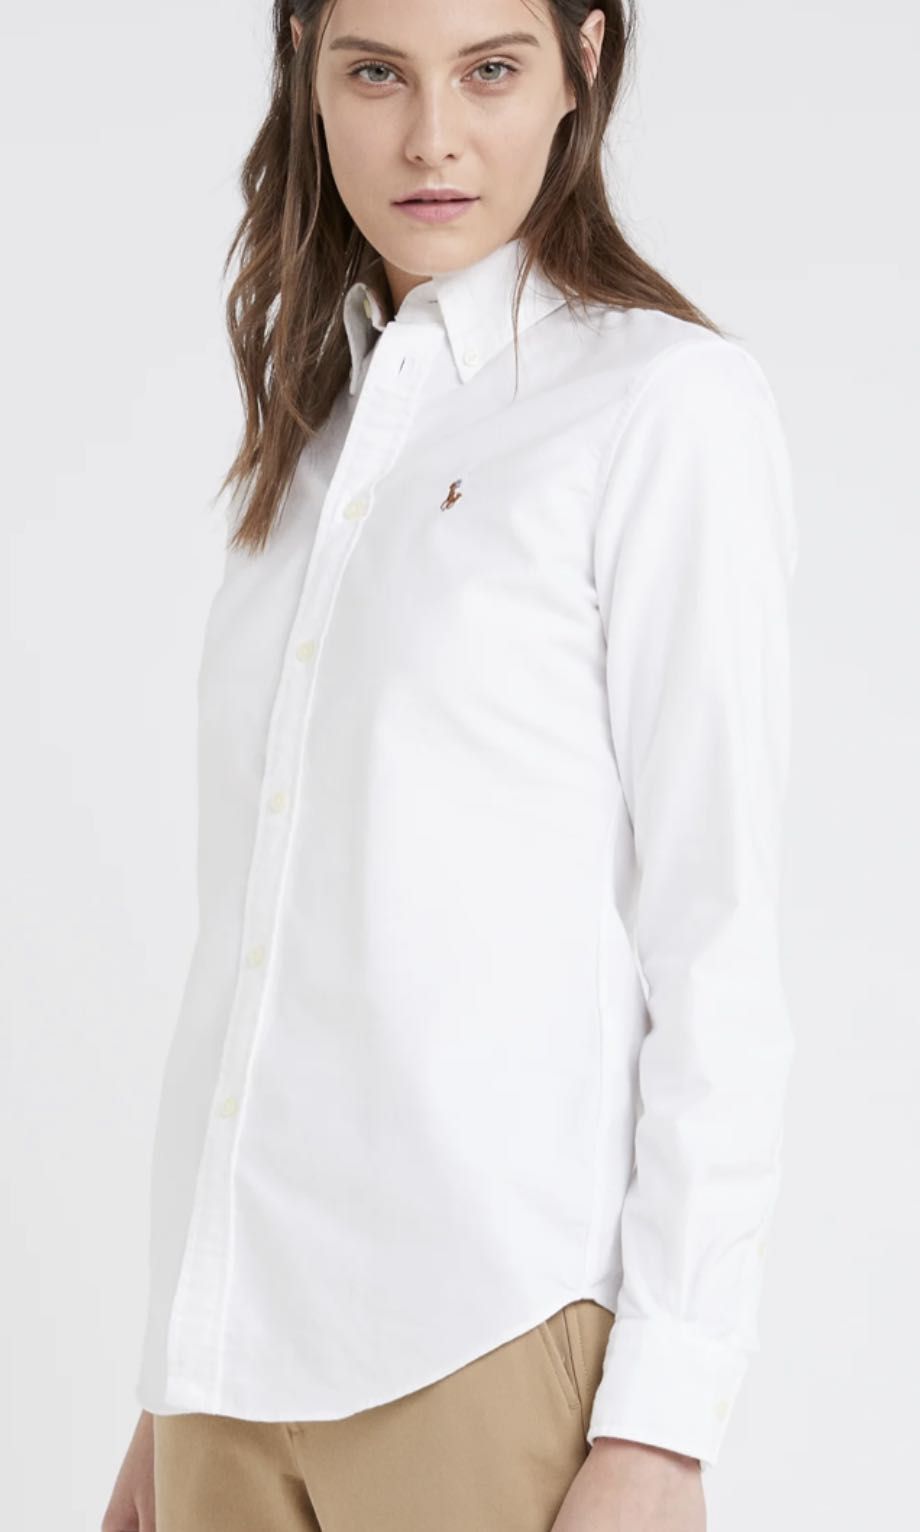 Polo Ralph Lauren Women Custom Fit Size S in White/ off white, Women's  Fashion, Tops, Shirts on Carousell